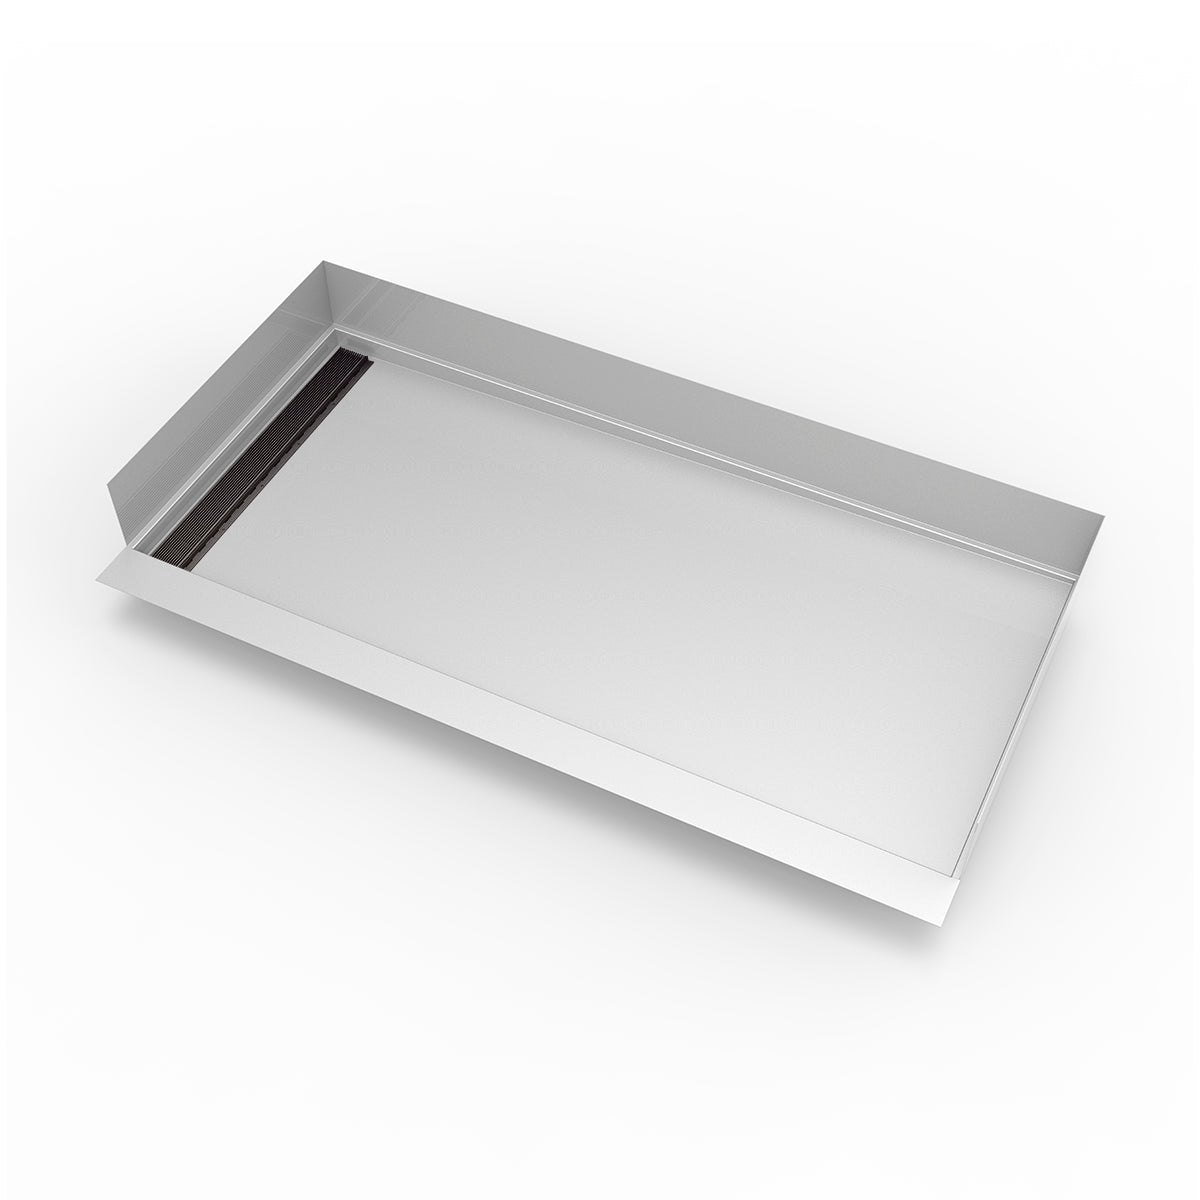 Infinity Drain 30"x 60" Curbless Stainless Steel Shower Base with Left Wall Wedge Wire Linear Drain location